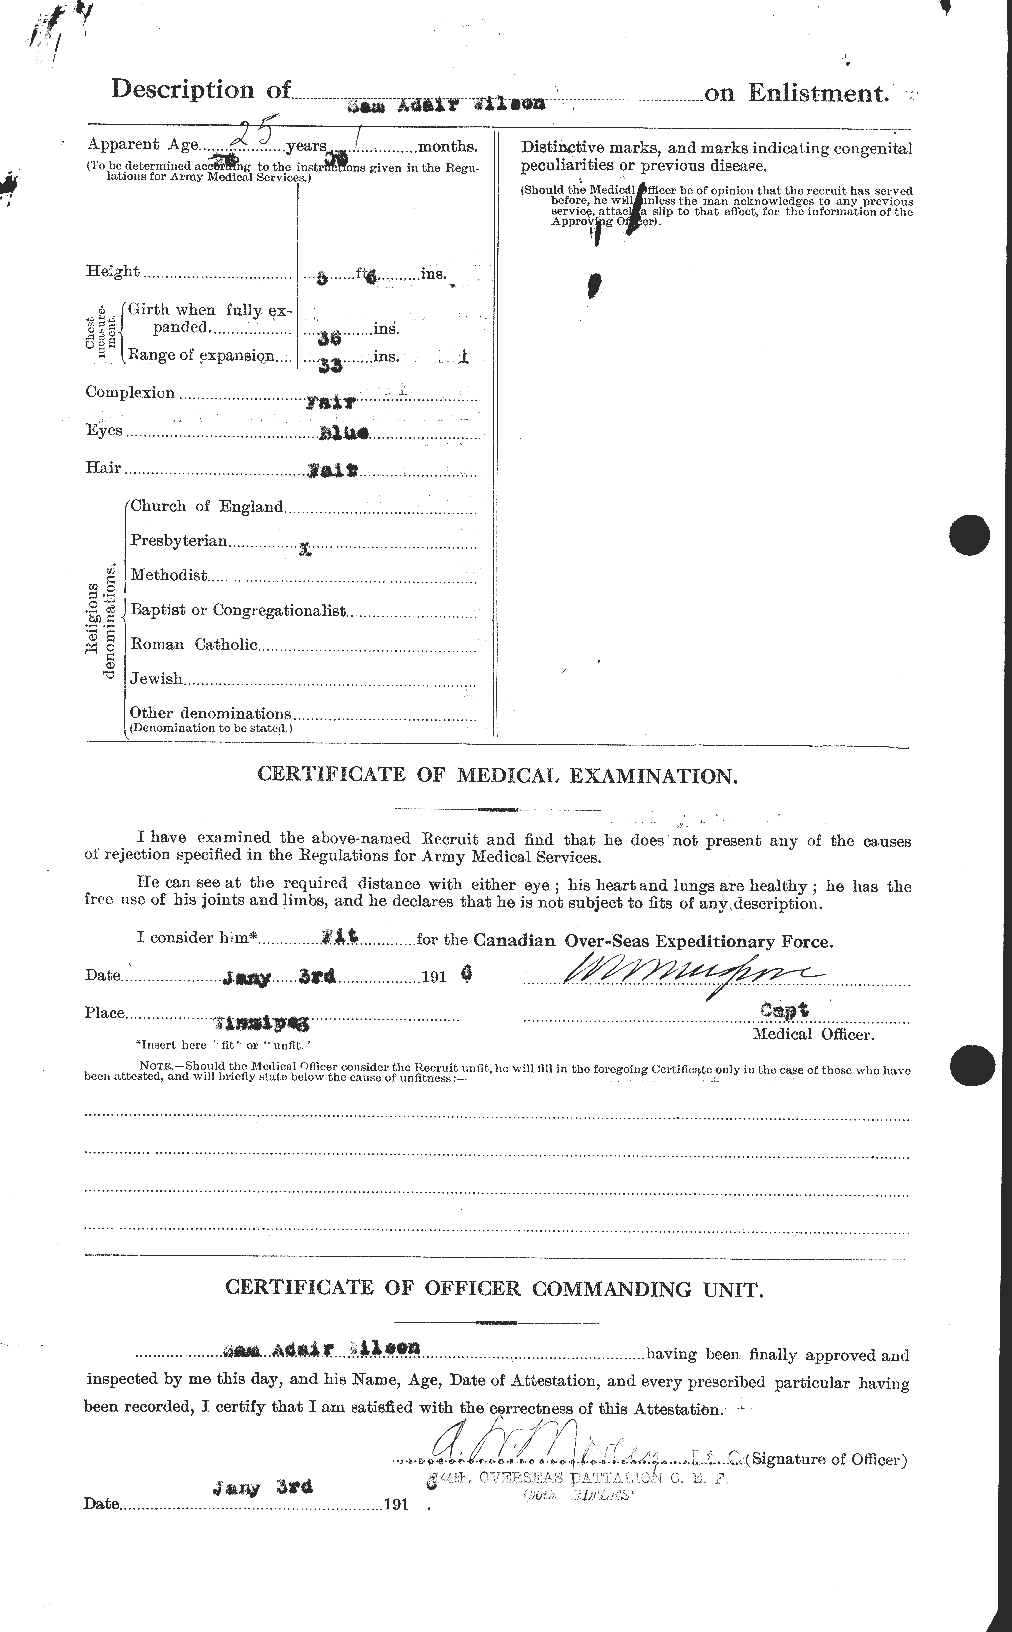 Personnel Records of the First World War - CEF 681109b